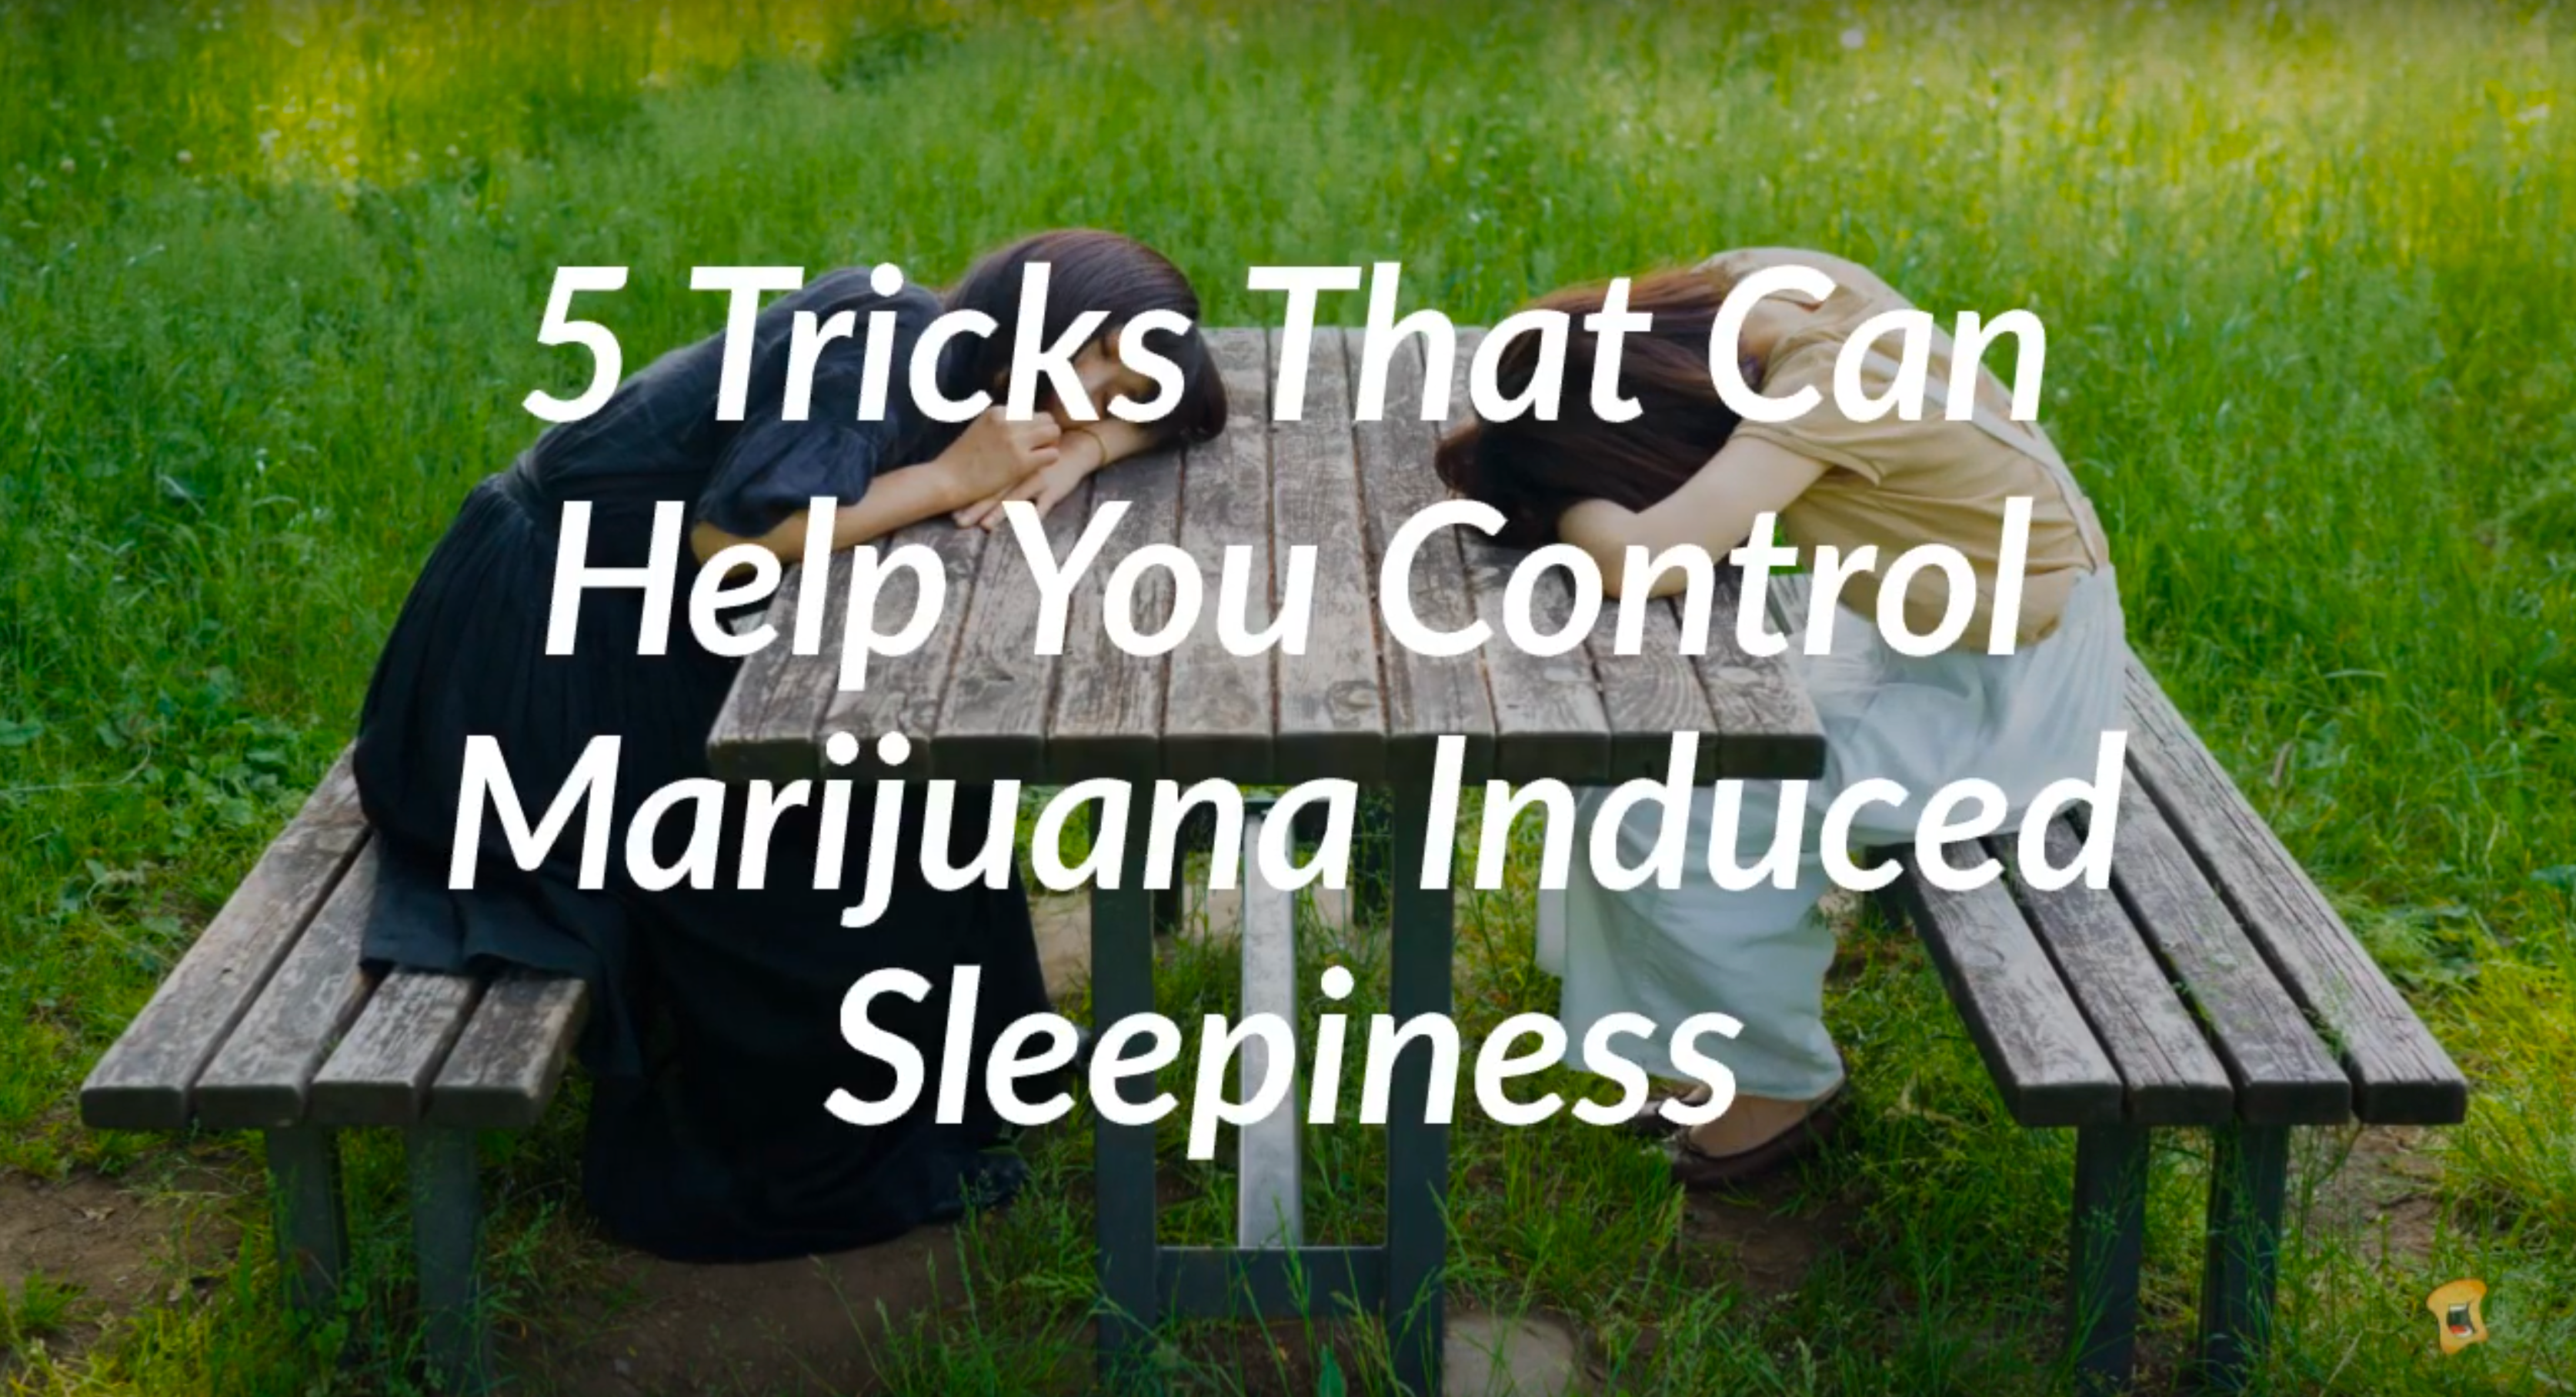 Does Weed Make You Tired Or Sleepy? These 5 Tricks Will Help You Control Cannabis-Induced Drowsiness